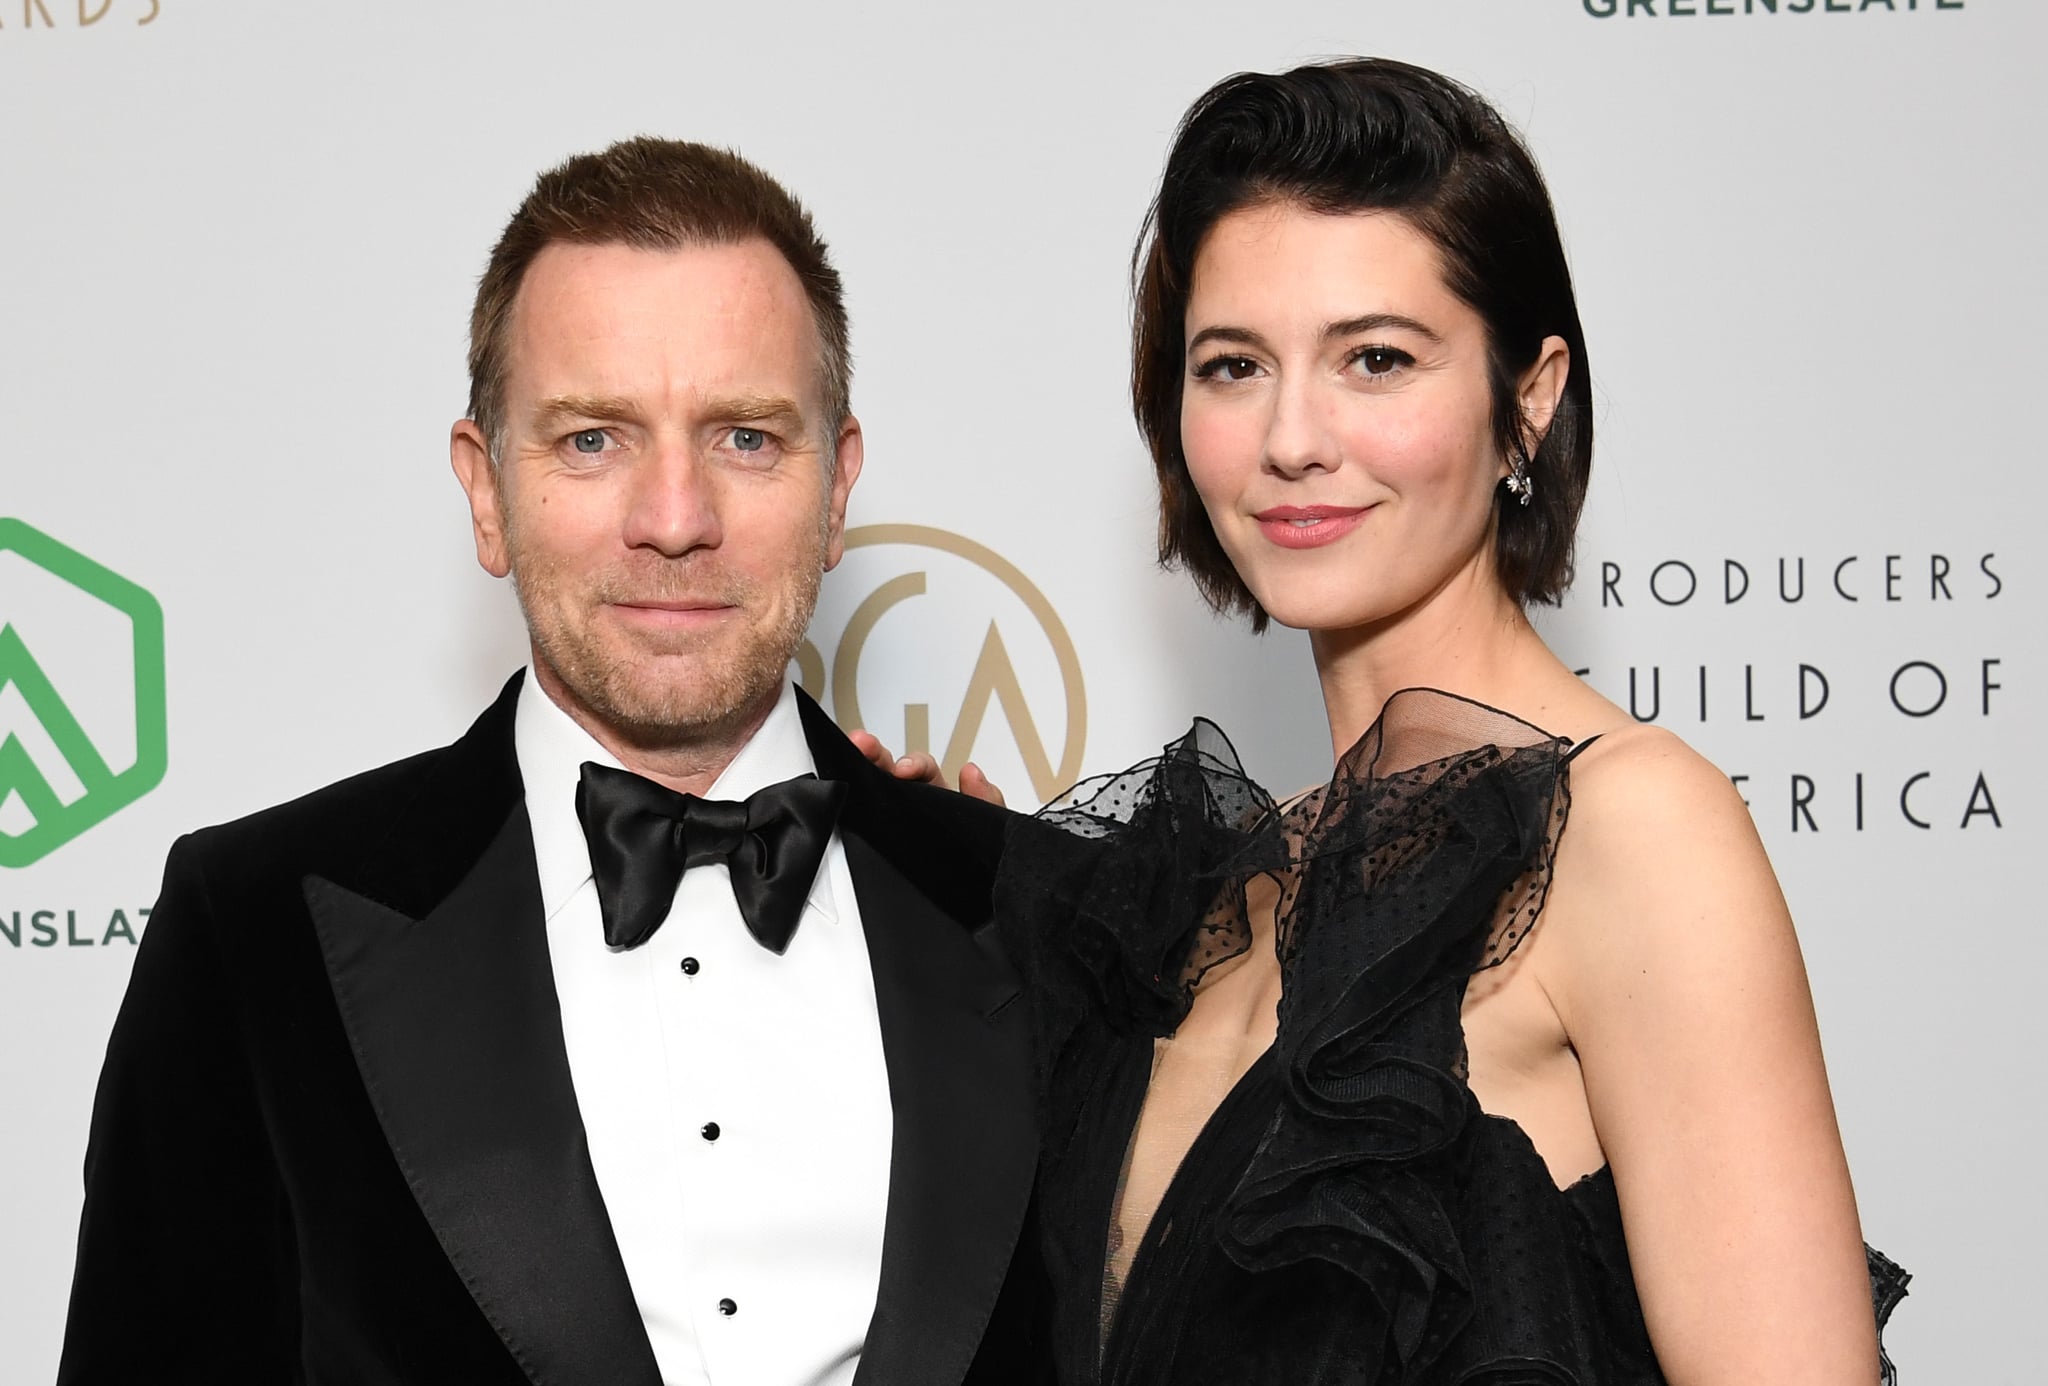 LOS ANGELES, CALIFORNIA - MARCH 19: (L-R) Ewan McGregor and Mary Elizabeth Winstead attend The 33rd Producers Guild Awards Supported By GreenSlate at Fairmont Century Plaza on March 19, 2022 in Los Angeles, California. (Photo by Jon Kopaloff/Getty Images for GreenSlate)